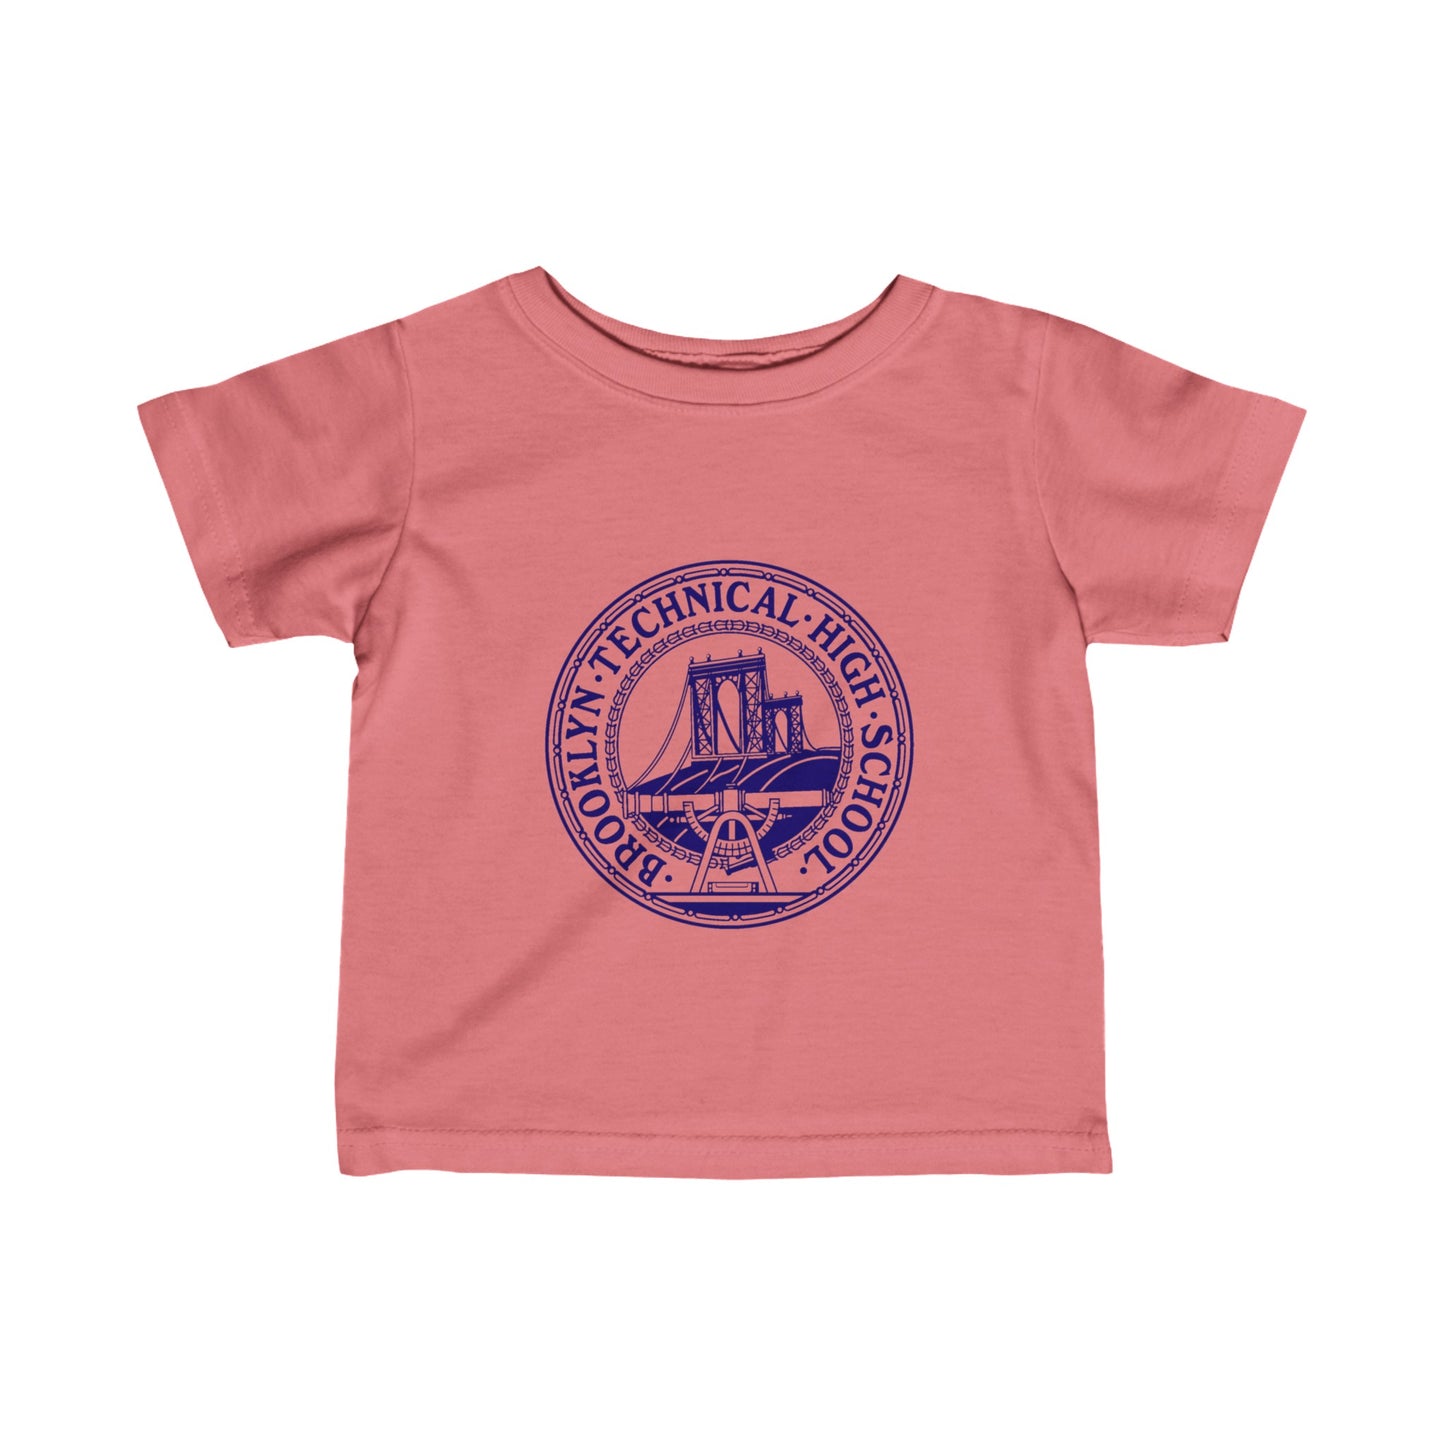 Family - Classic Tech Seal - Infant Fine Jersey T-Shirt